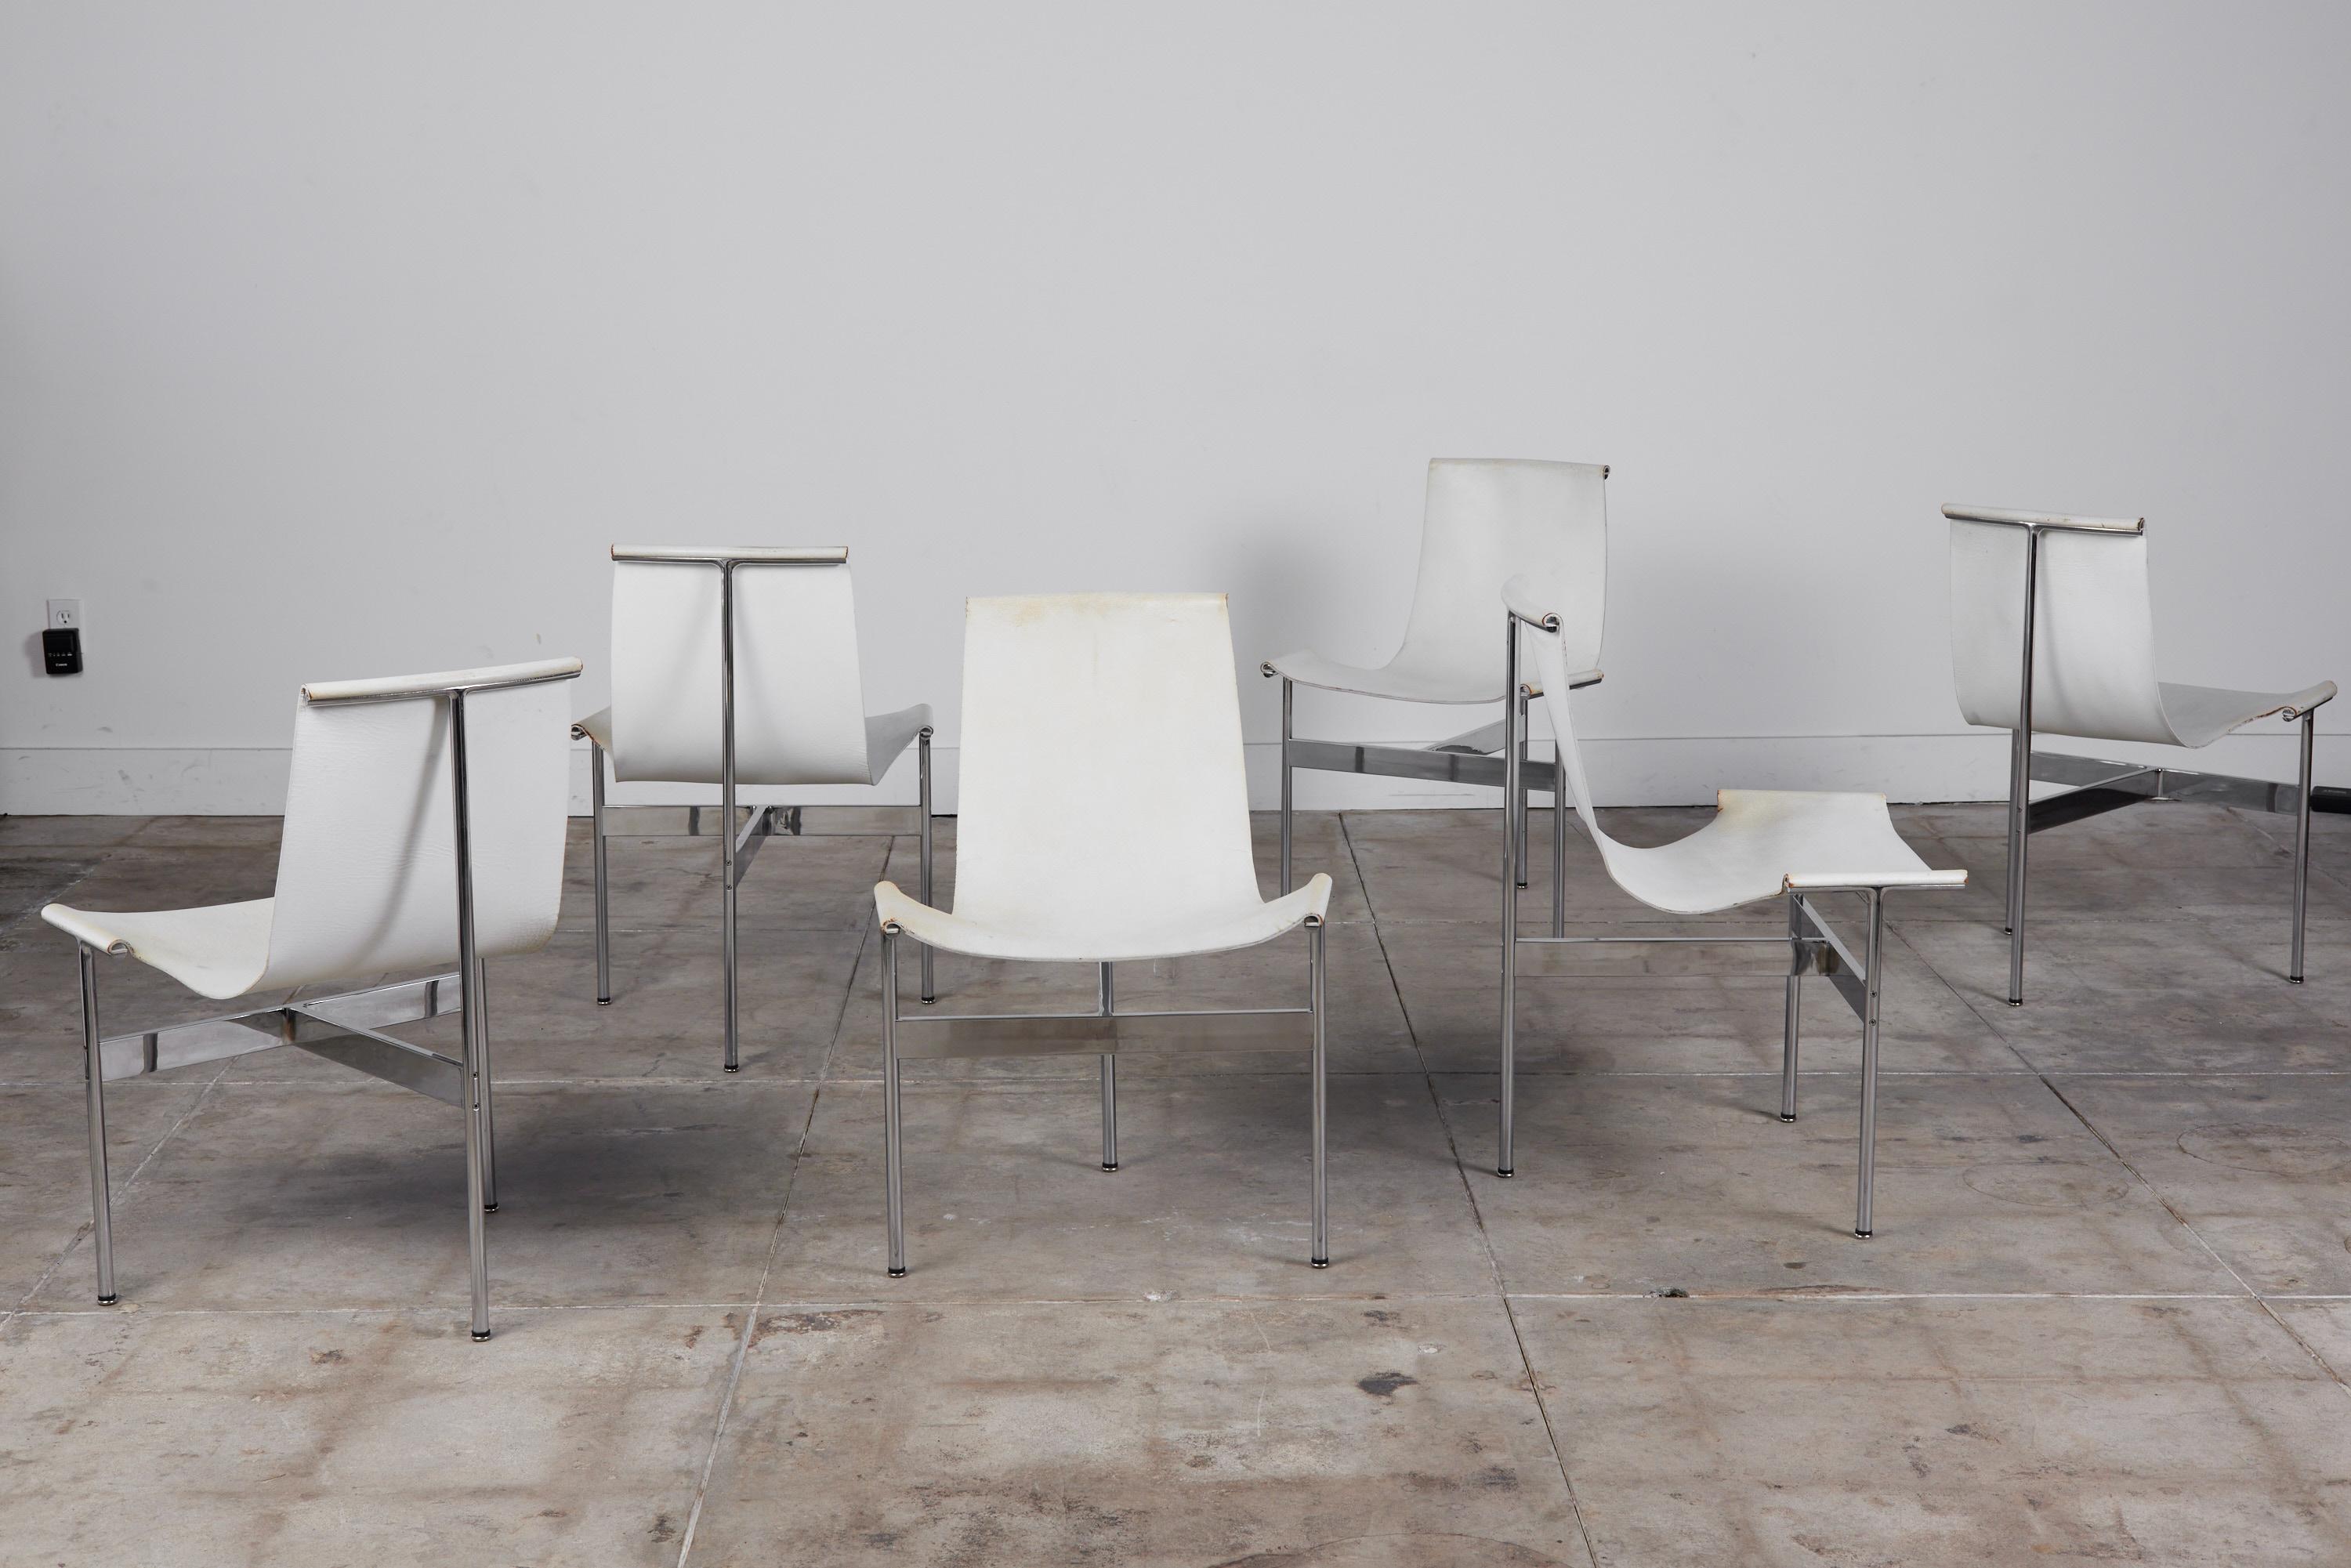 Set of six three-legged chairs designed by William Katavolos, Douglas Kelley and Ross Littell in 1952, USA. The iconic sling-back T chairs feature a chrome plated steel frame and legs with steel cross bars and original white leather